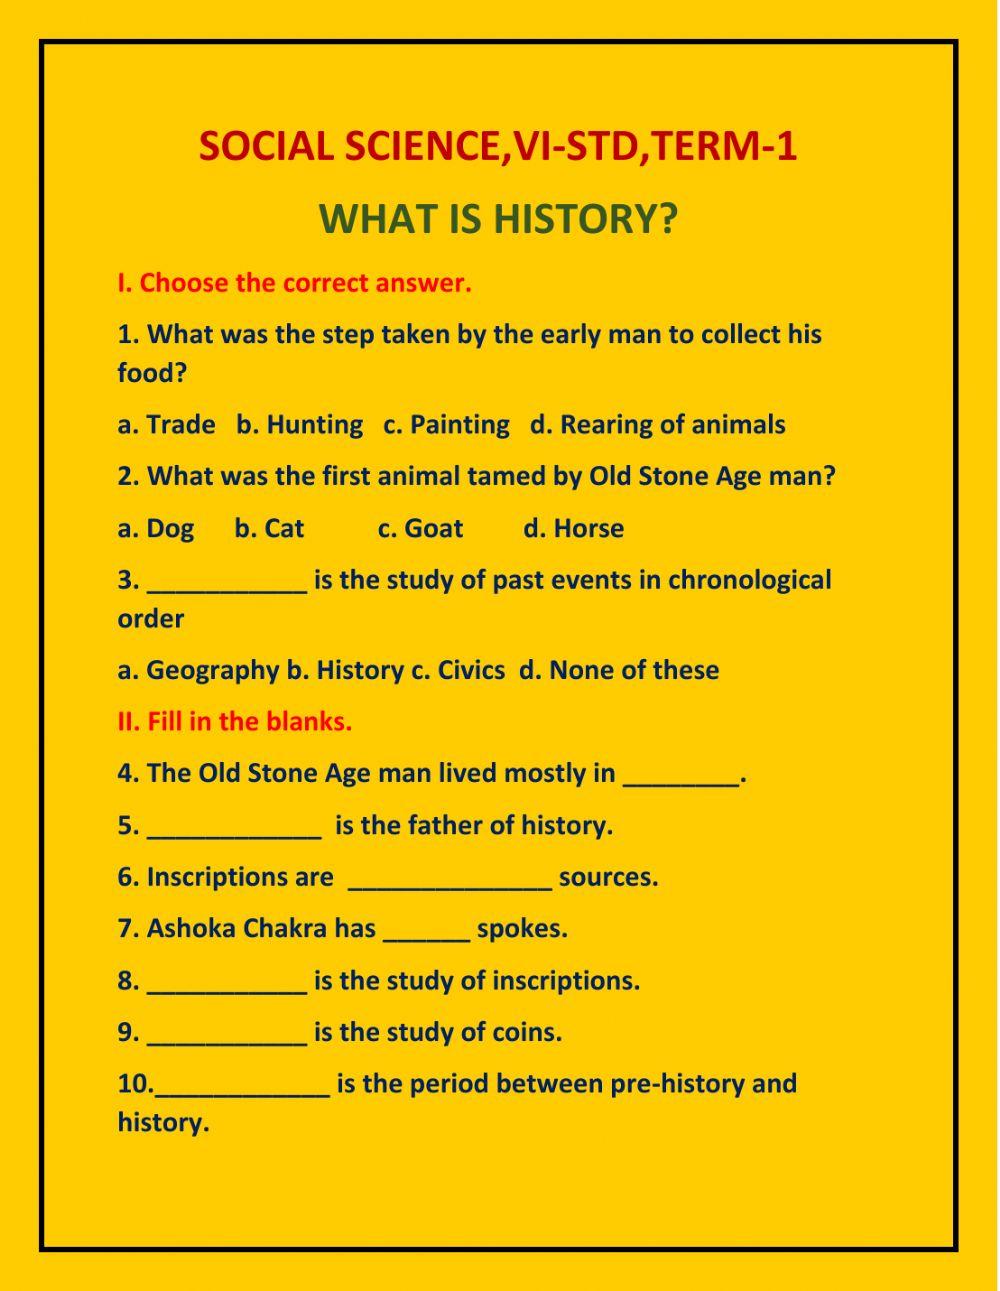 VI-Std,Term-1,What is history?